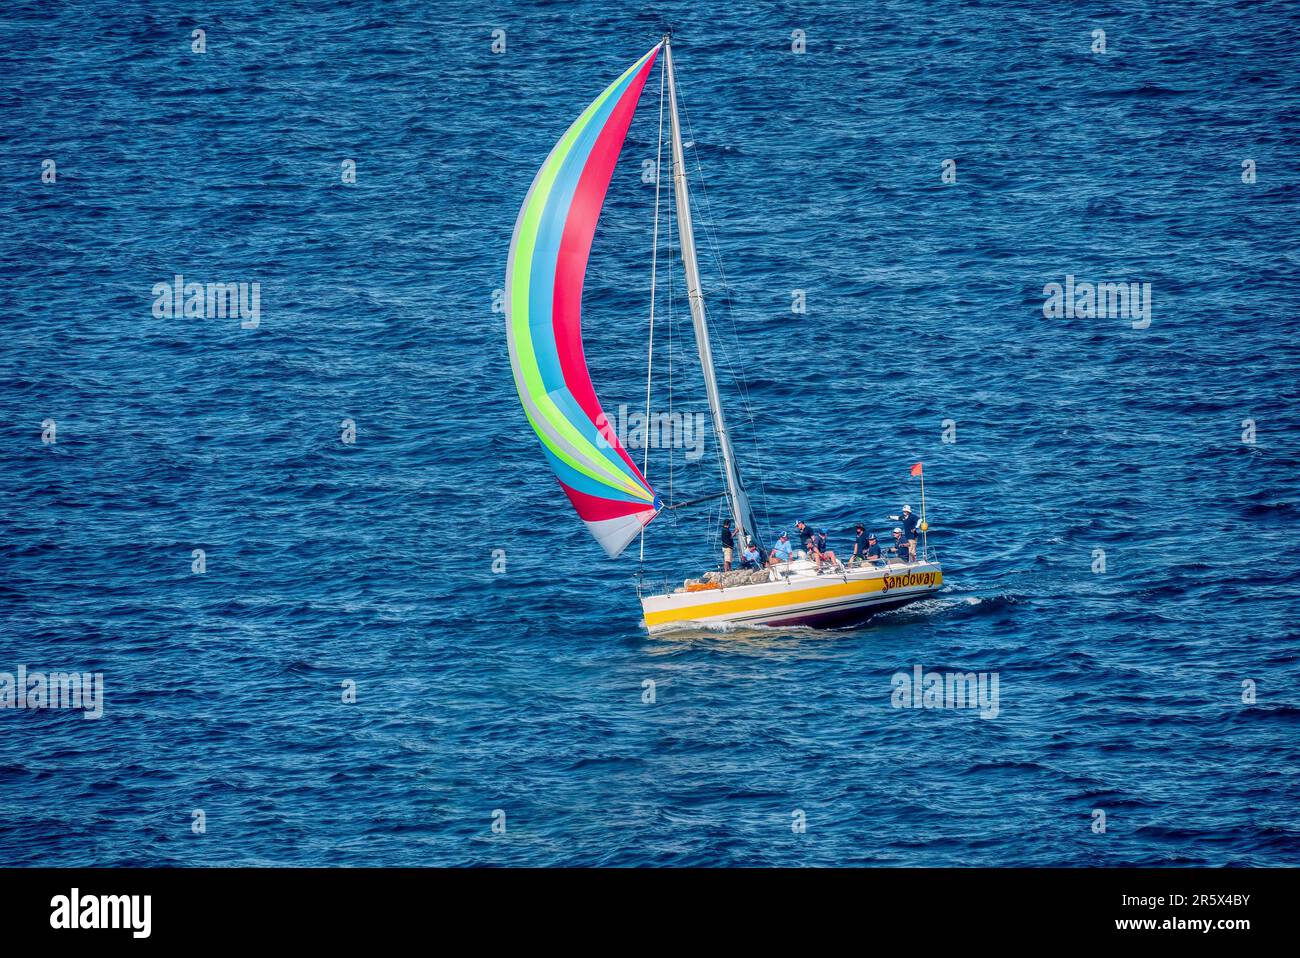 Puerto Galera, Philippines - March 30, 2013. A yacht sailing downwind in a local regatta, with its colorful spinnaker flying and crew on deck. Stock Photo